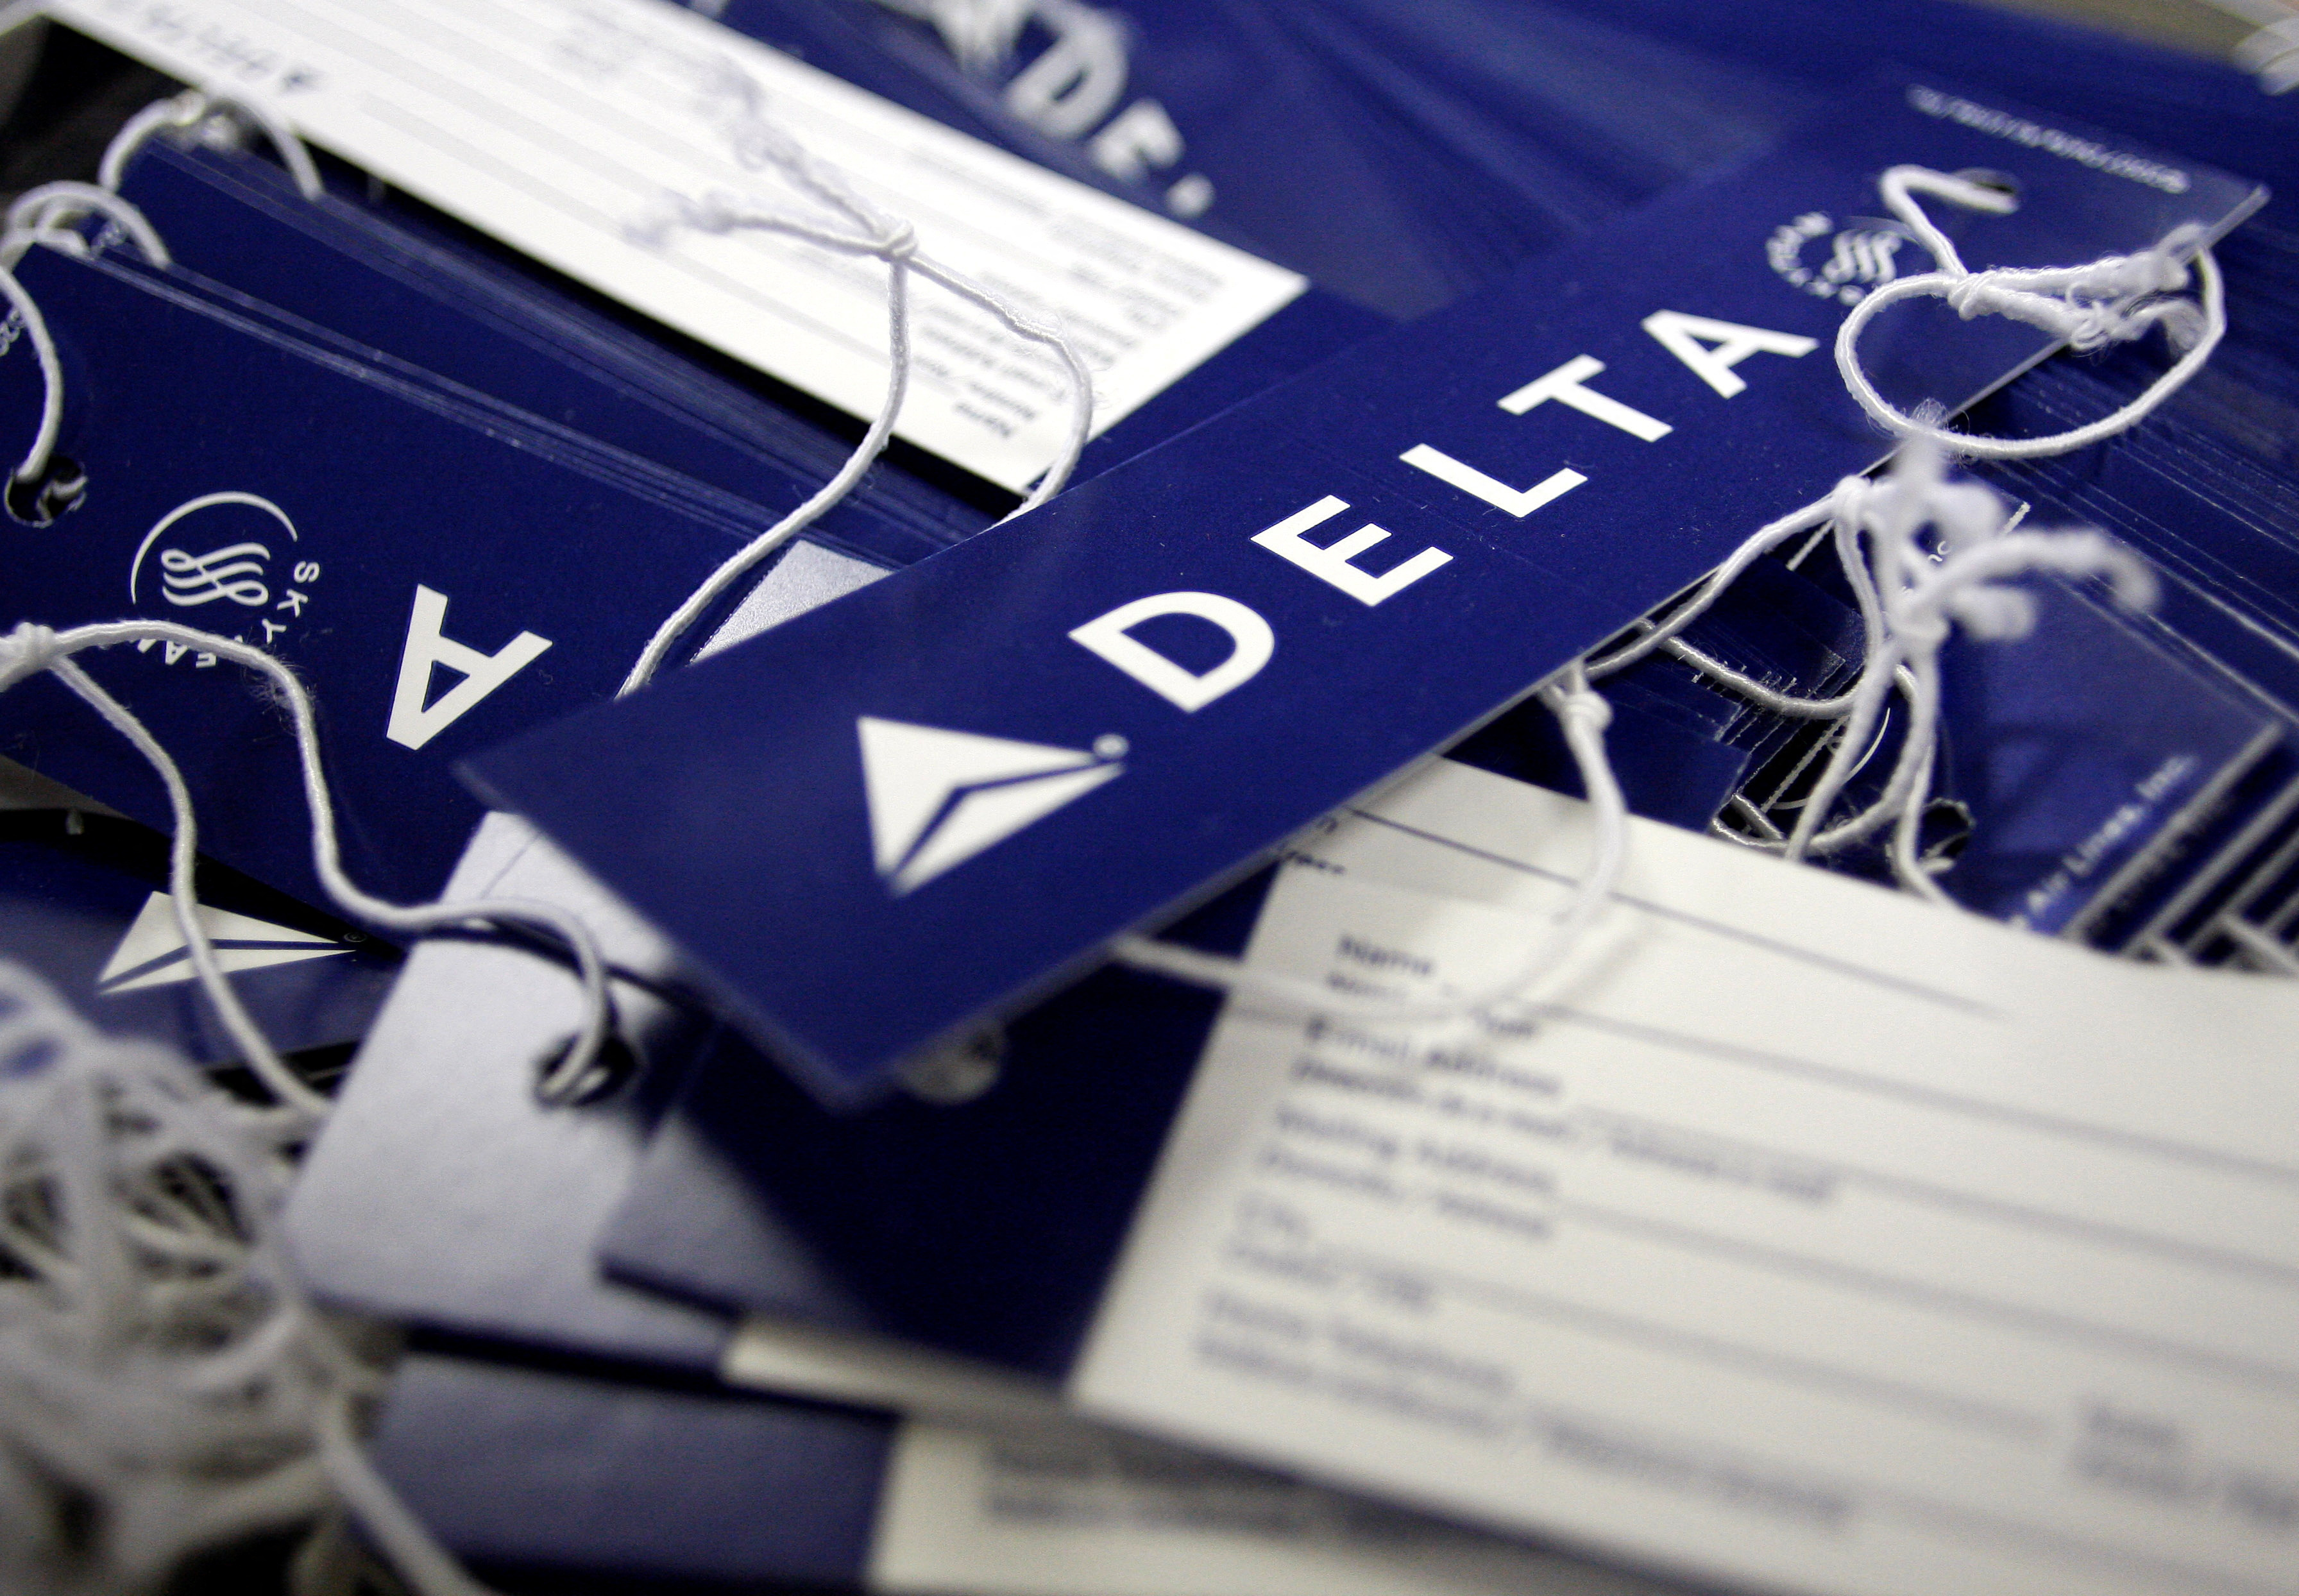 Delta airline name tags are seen at Delta terminal in JFK Airport in New York